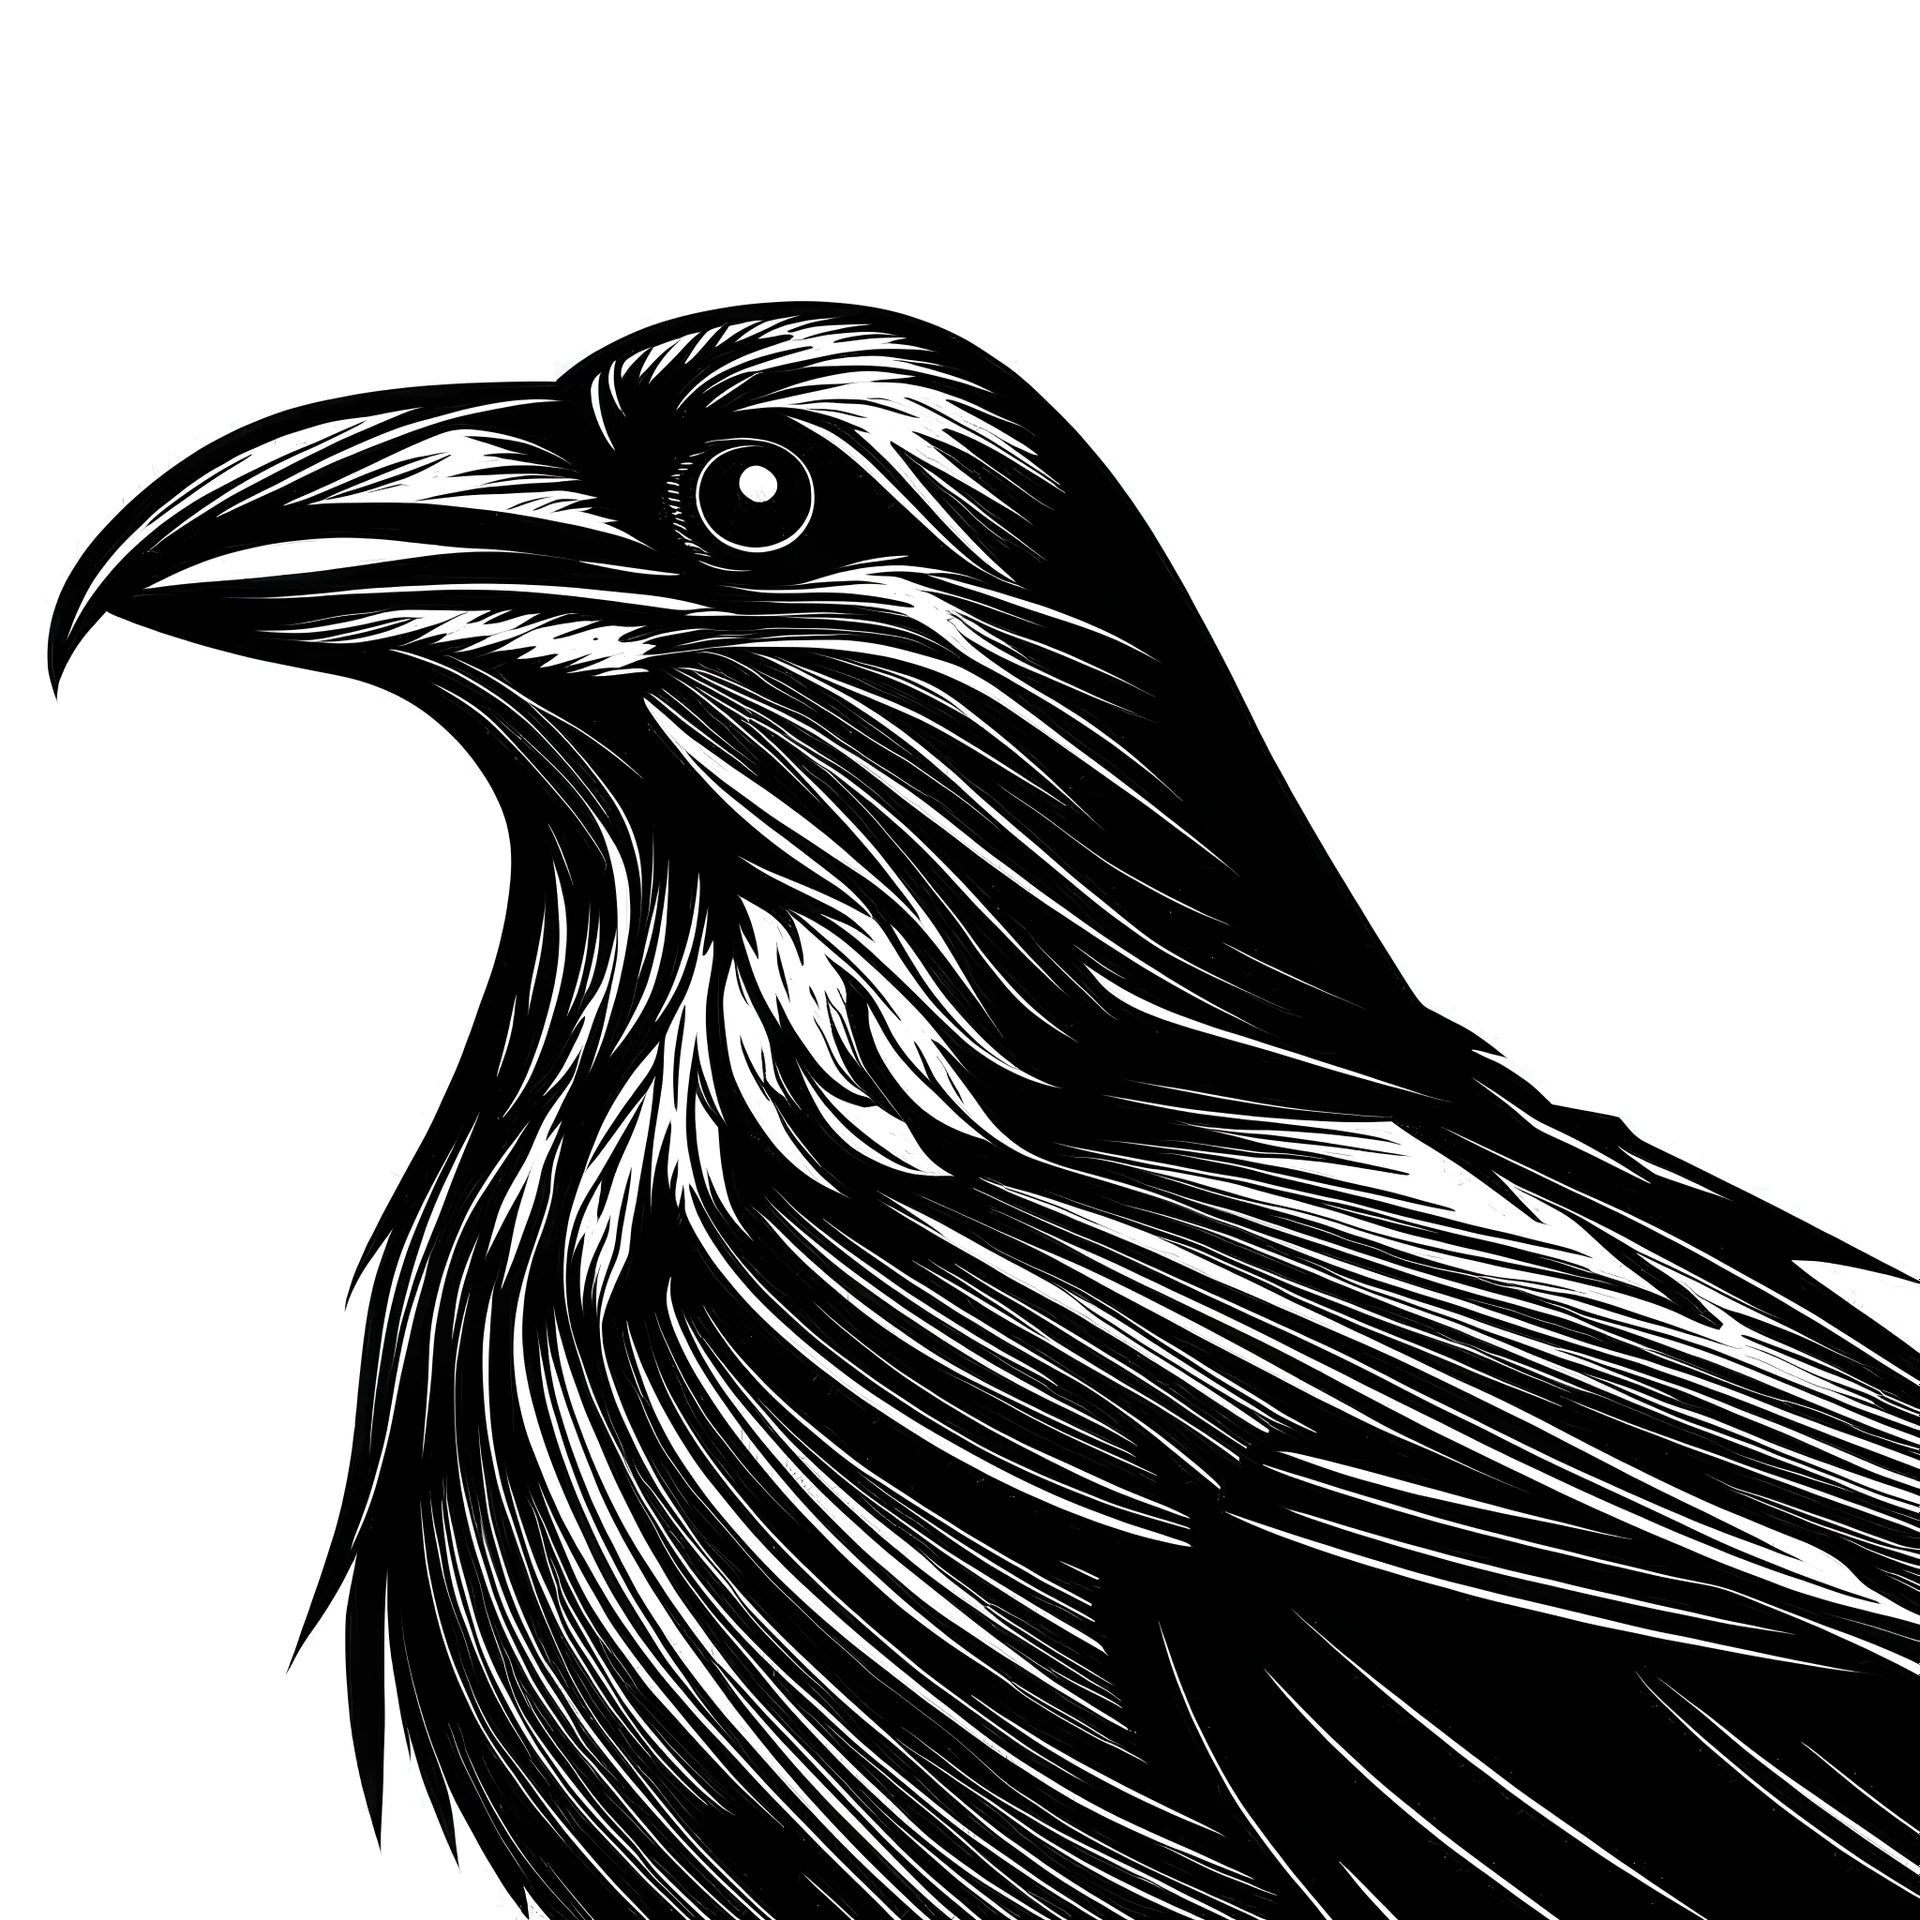 waist-length bust black raven, profile, open mouth, linocut style, white background, empty space around the head, minimalism, artistic deformation of the head shape, empty space at the back of the head